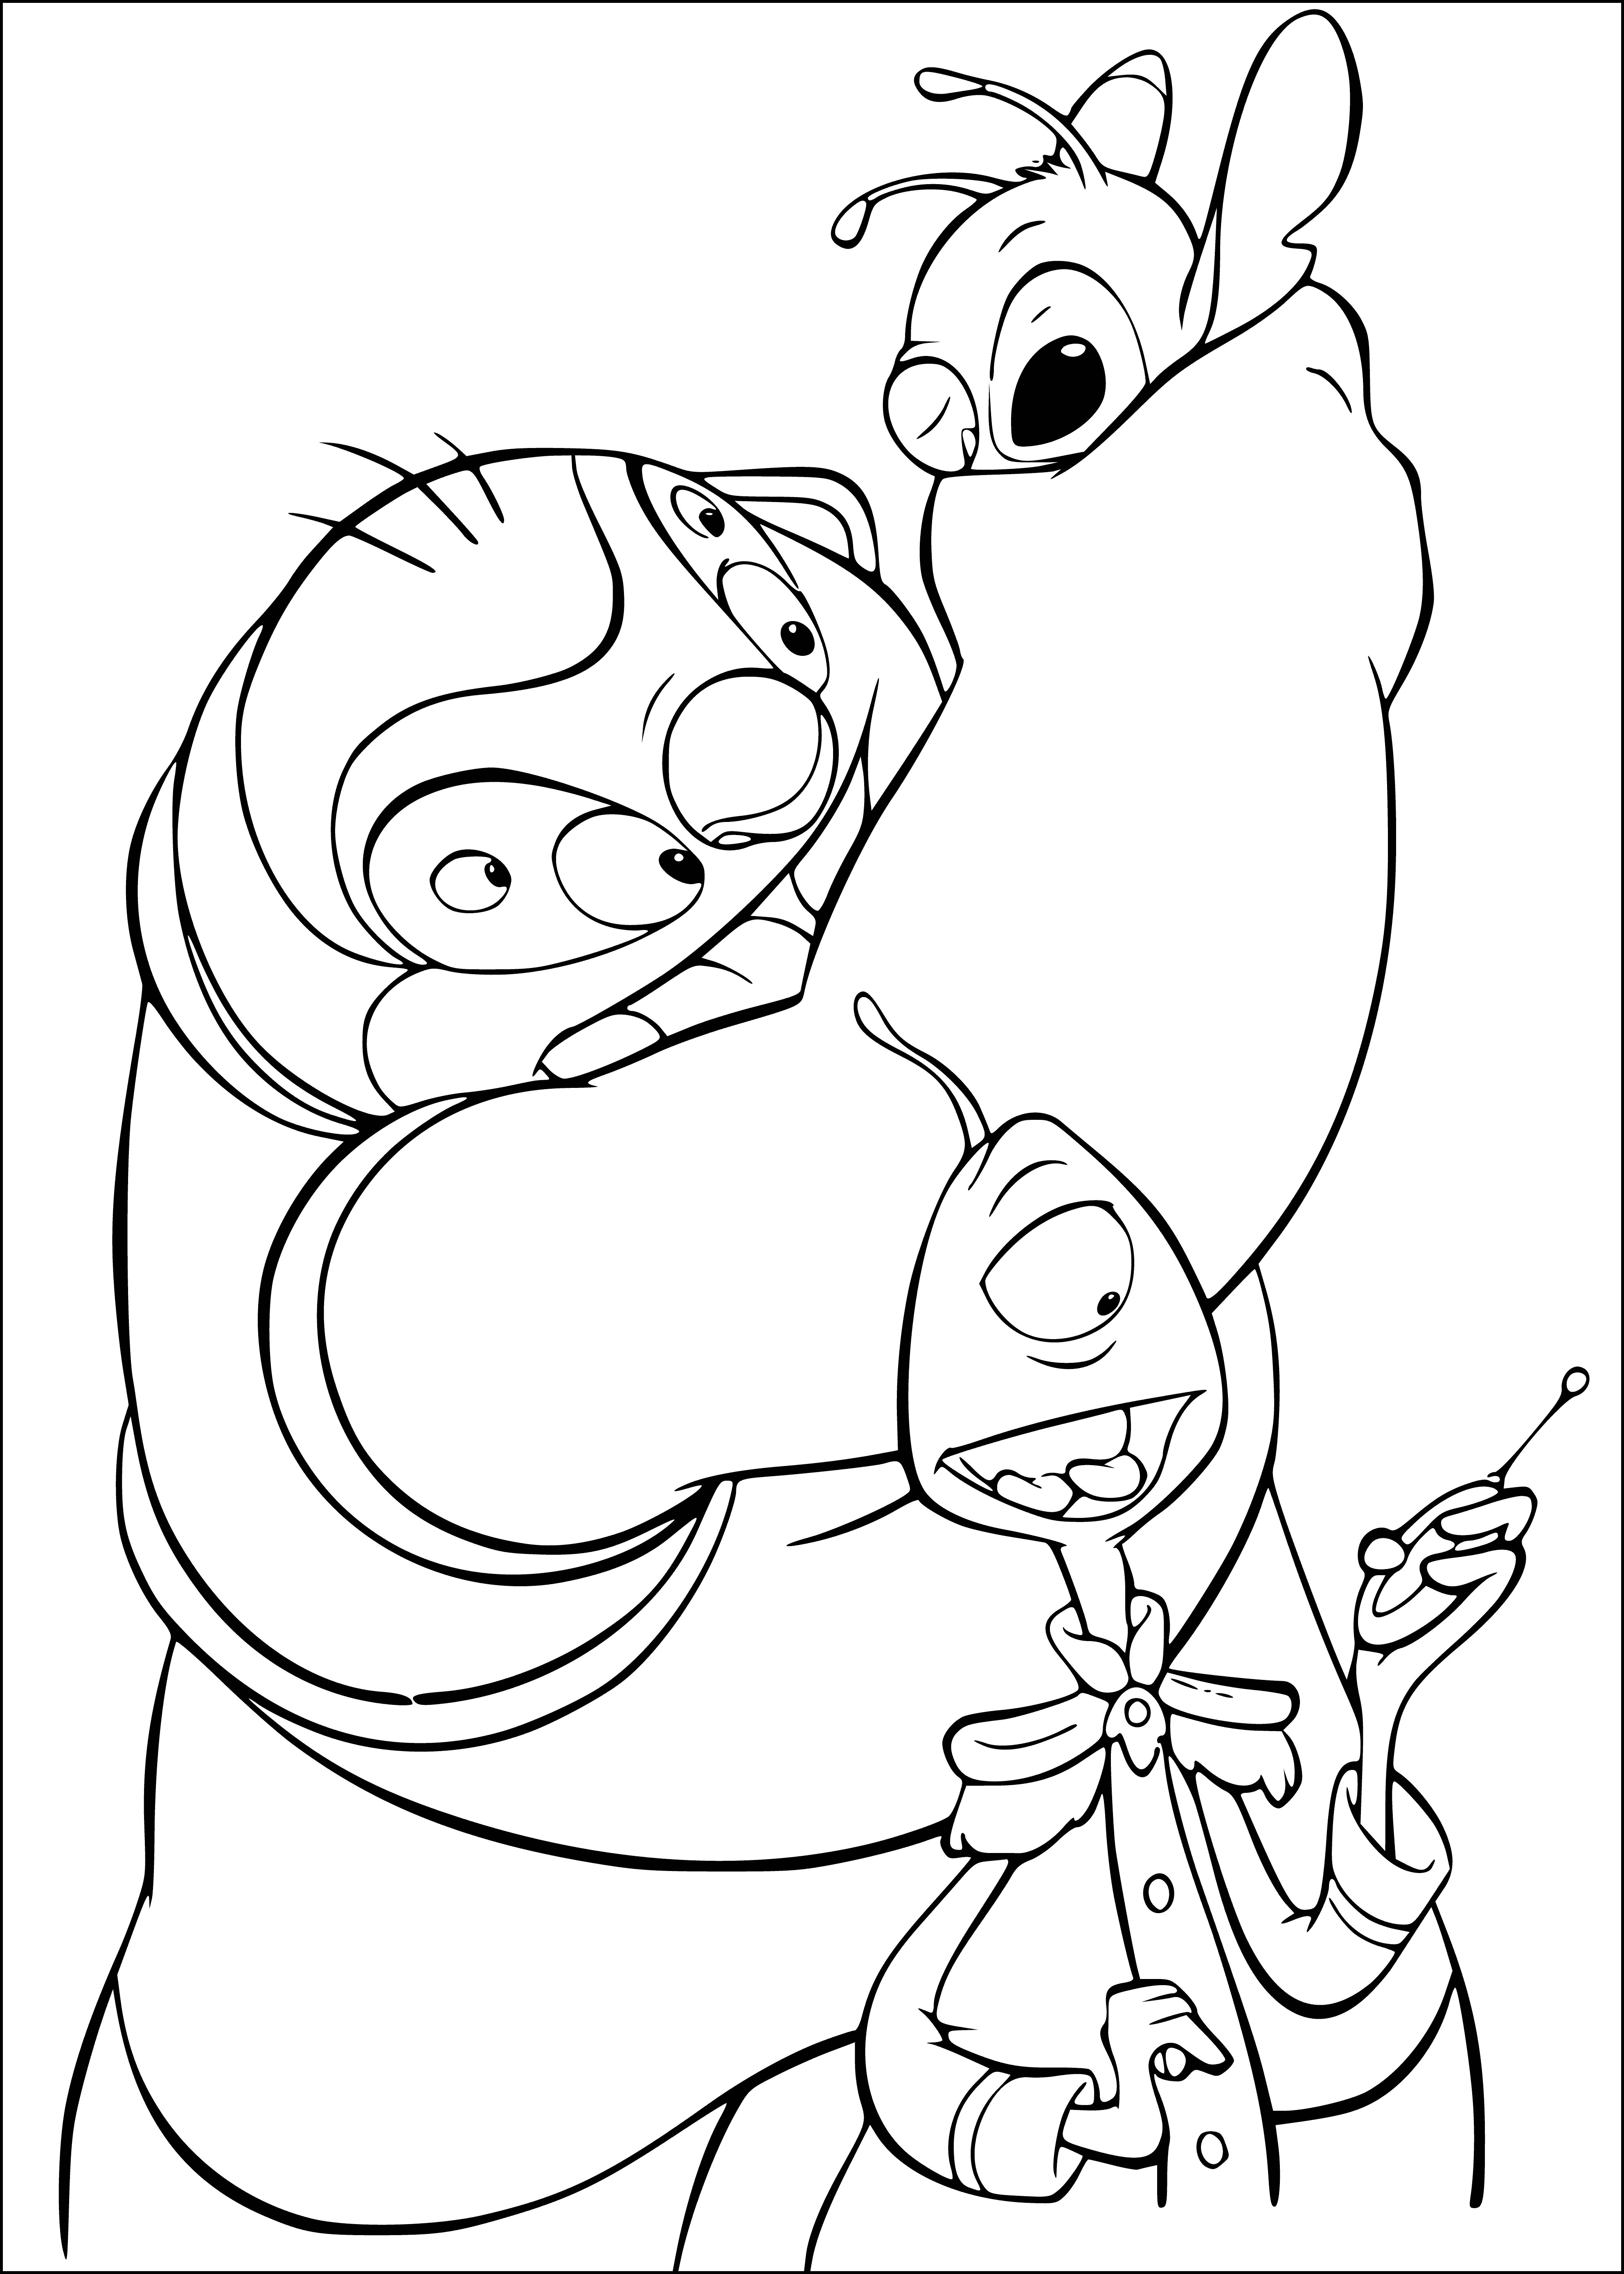 Jamba, Flickley and Stitch coloring page